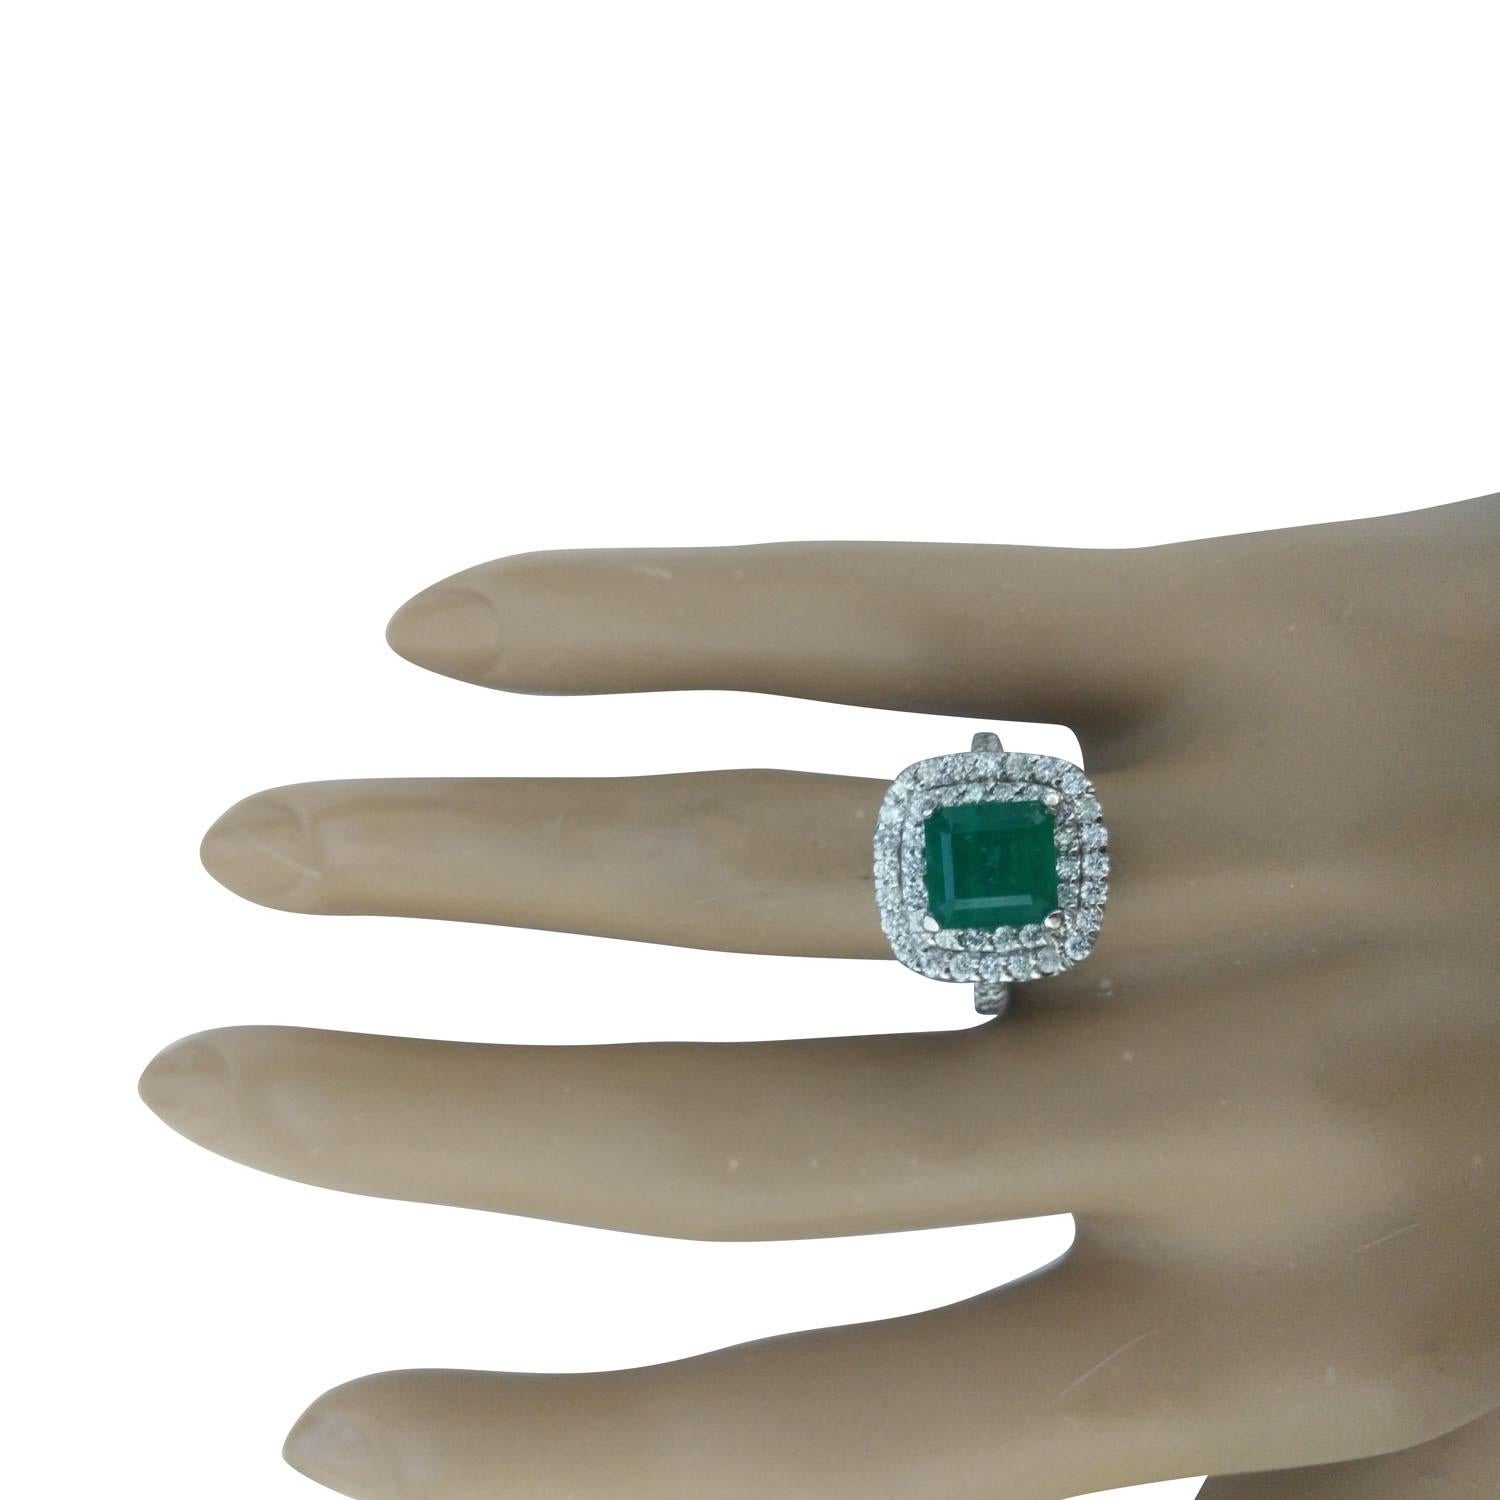 4.10 Carat Natural Emerald 14 Karat Solid White Gold Diamond Ring
Stamped: 14K 
Total Ring Weight: 6 Grams 
Emerald Weight: 3.00 Carat (7.50x7.50 Millimeters) 
Diamond Weight: 1.10 Carat (F-G Color, VS2-SI1 Clarity)
Quantity: 40
Face Measures: